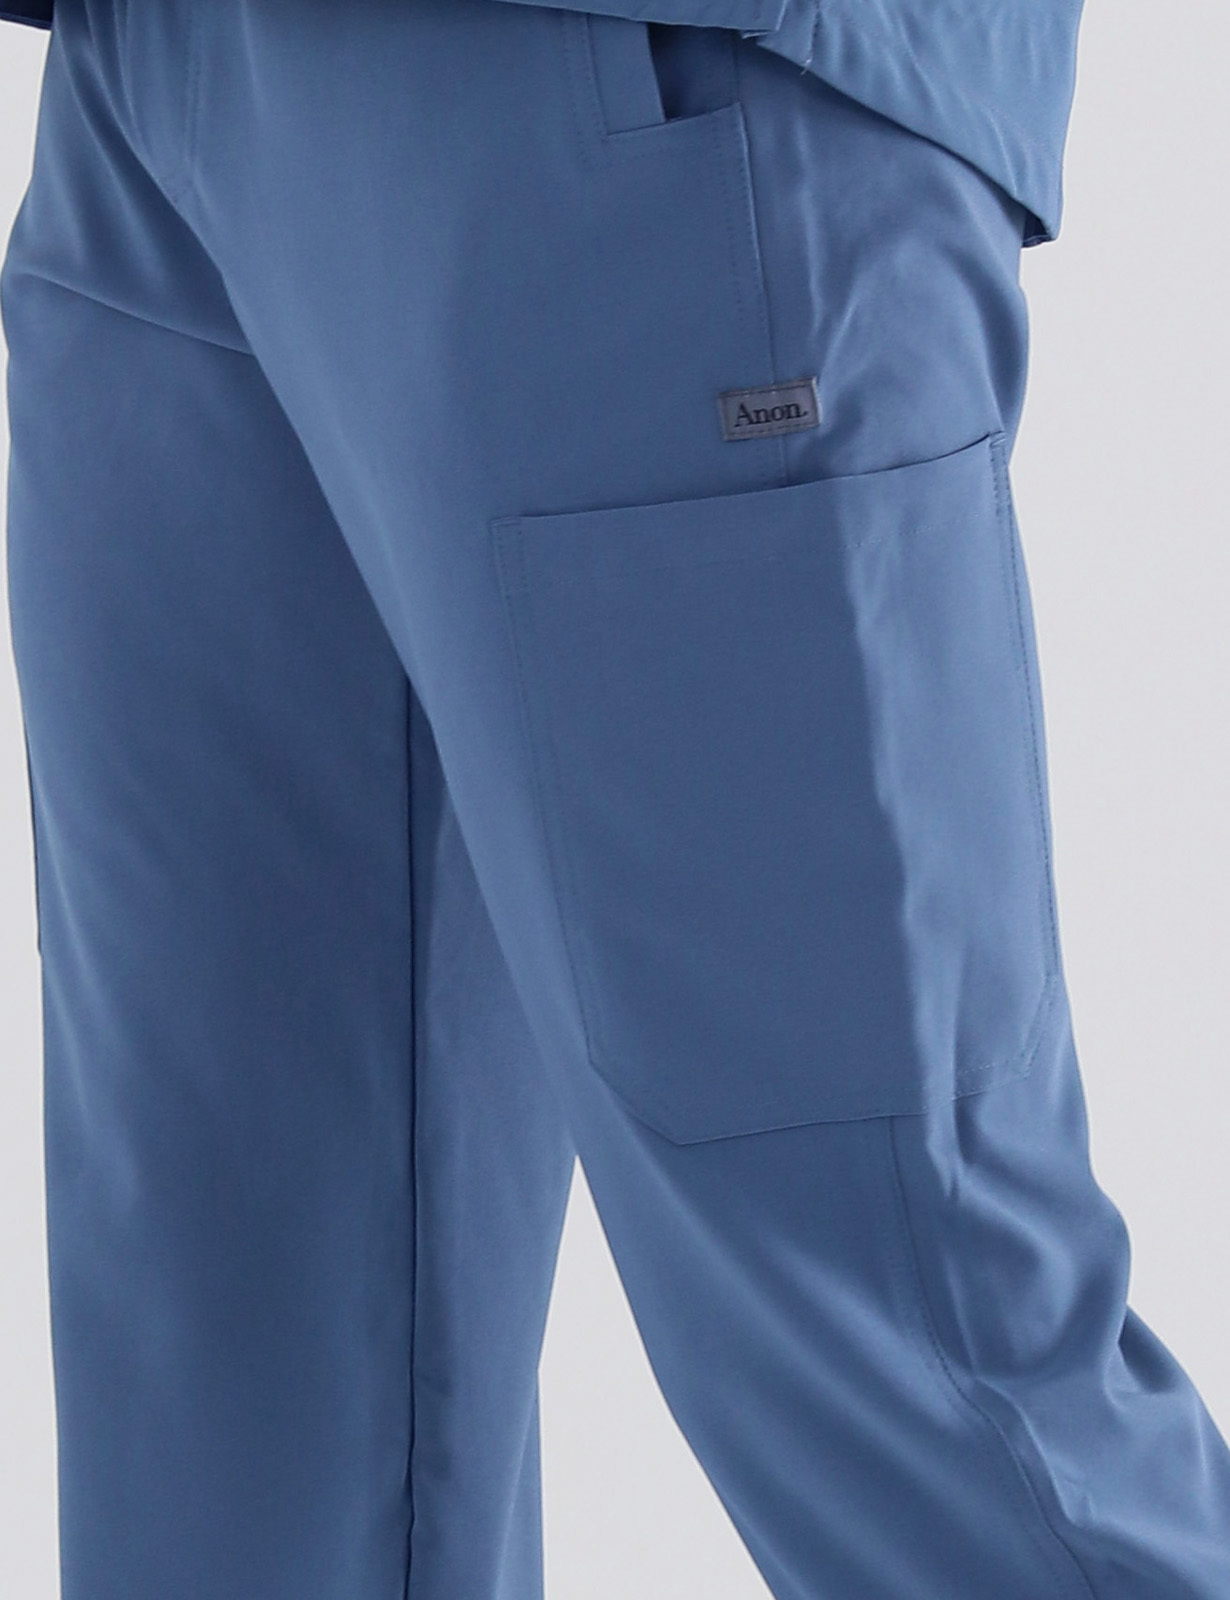 Anon Men's Scrub Pants (Stealth Collection) Poly/Spandex - Steel Blue - 3X Large